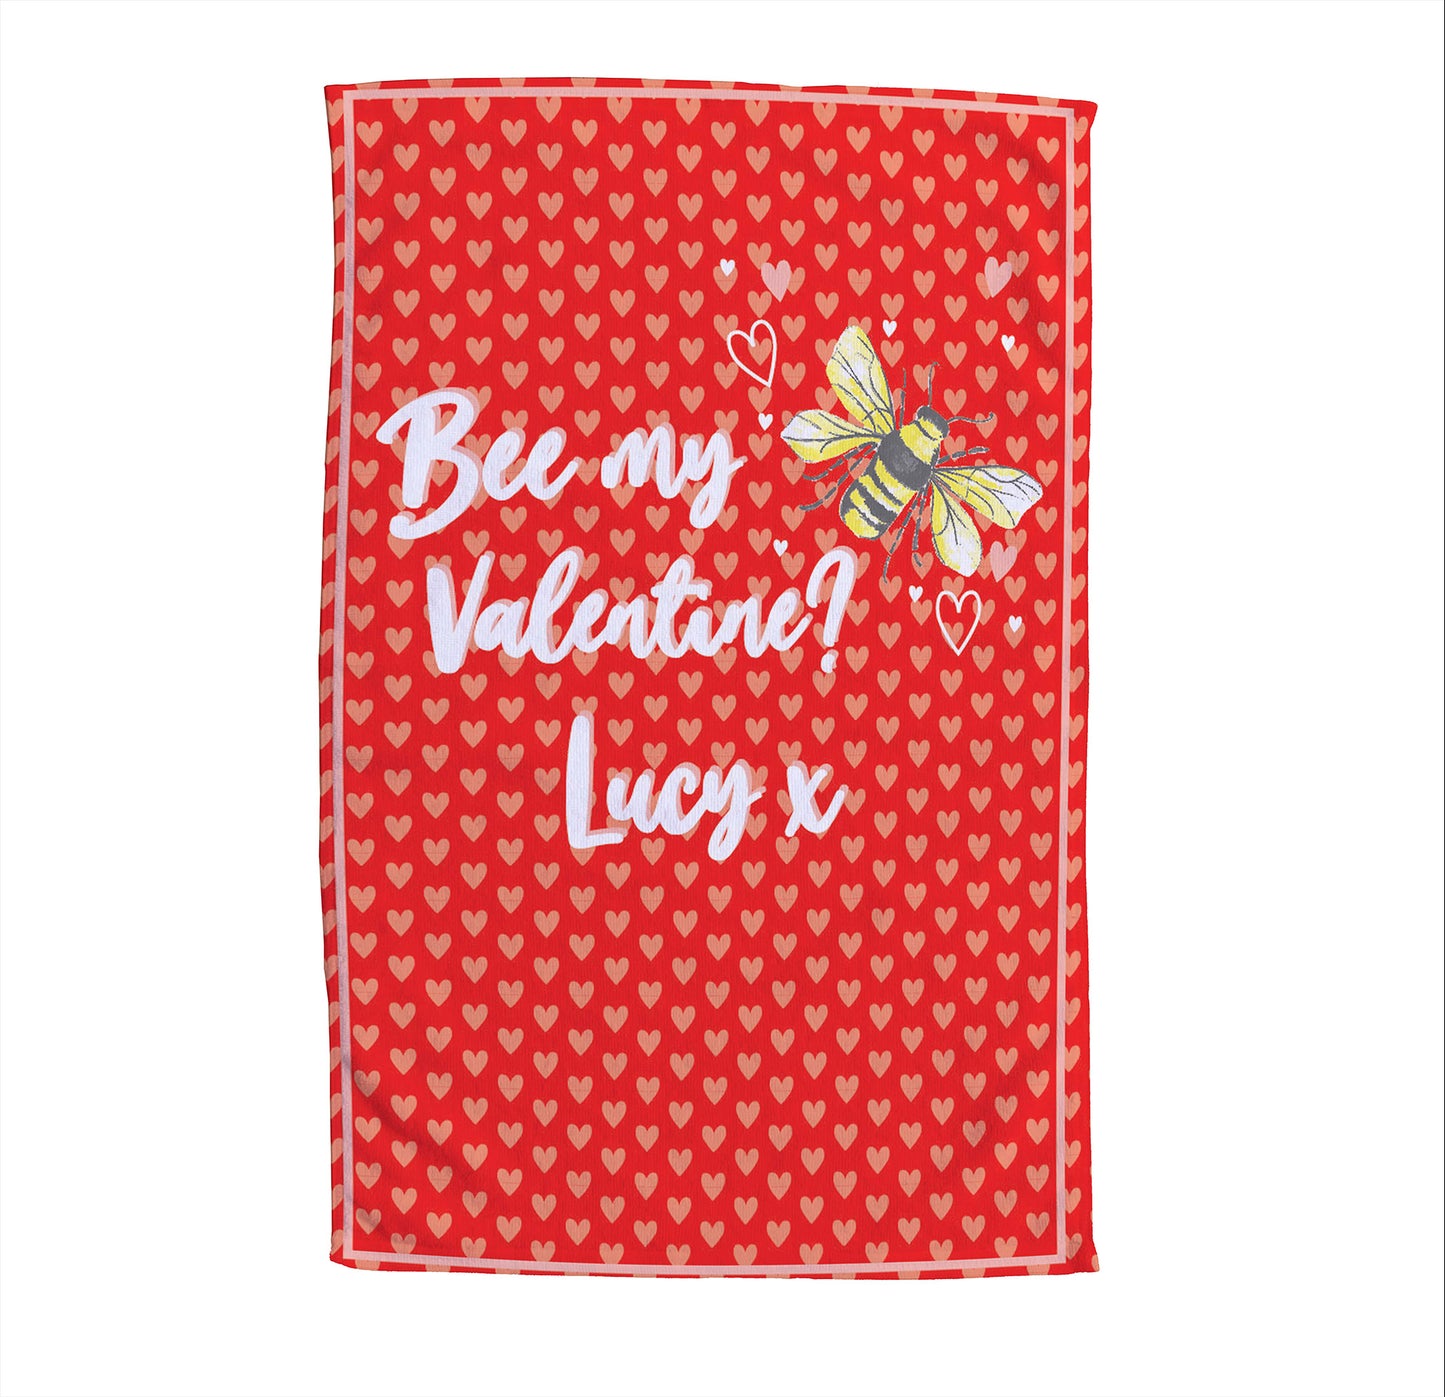 Personalised Valentines Tea Towel, 45cm x 65cm | Fab Gifts. Bee my Valentine? Heart Background.